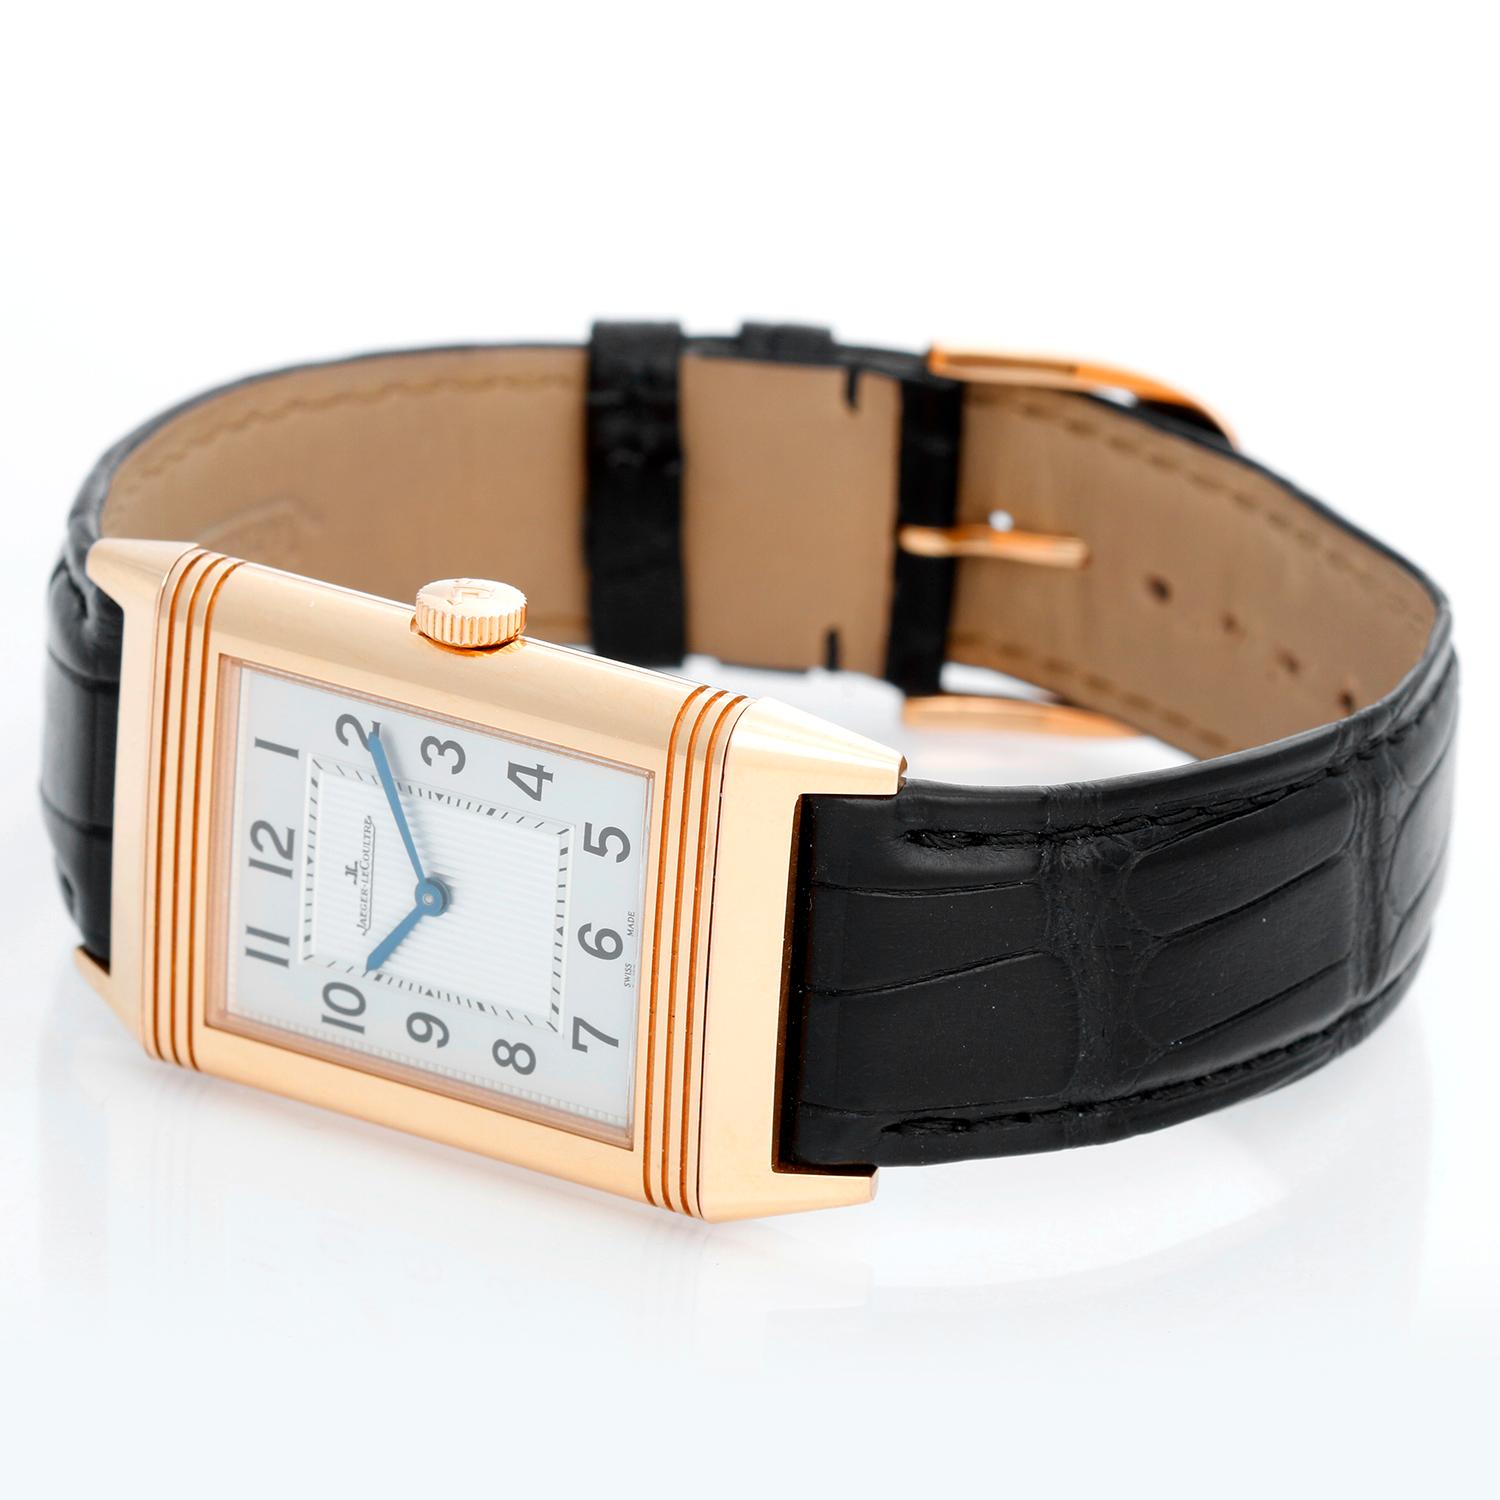 Jaeger - LeCoultre Reverso 18k Rose Gold Men's Watch 227.2.62 - Manual winding. 18k rose gold Reverso case  (27mm x 45mm). Silver dial with black Arabic numerals; reverses to a solid case. Black Jaeger-LeCoultre alligator strap and 18k rose gold